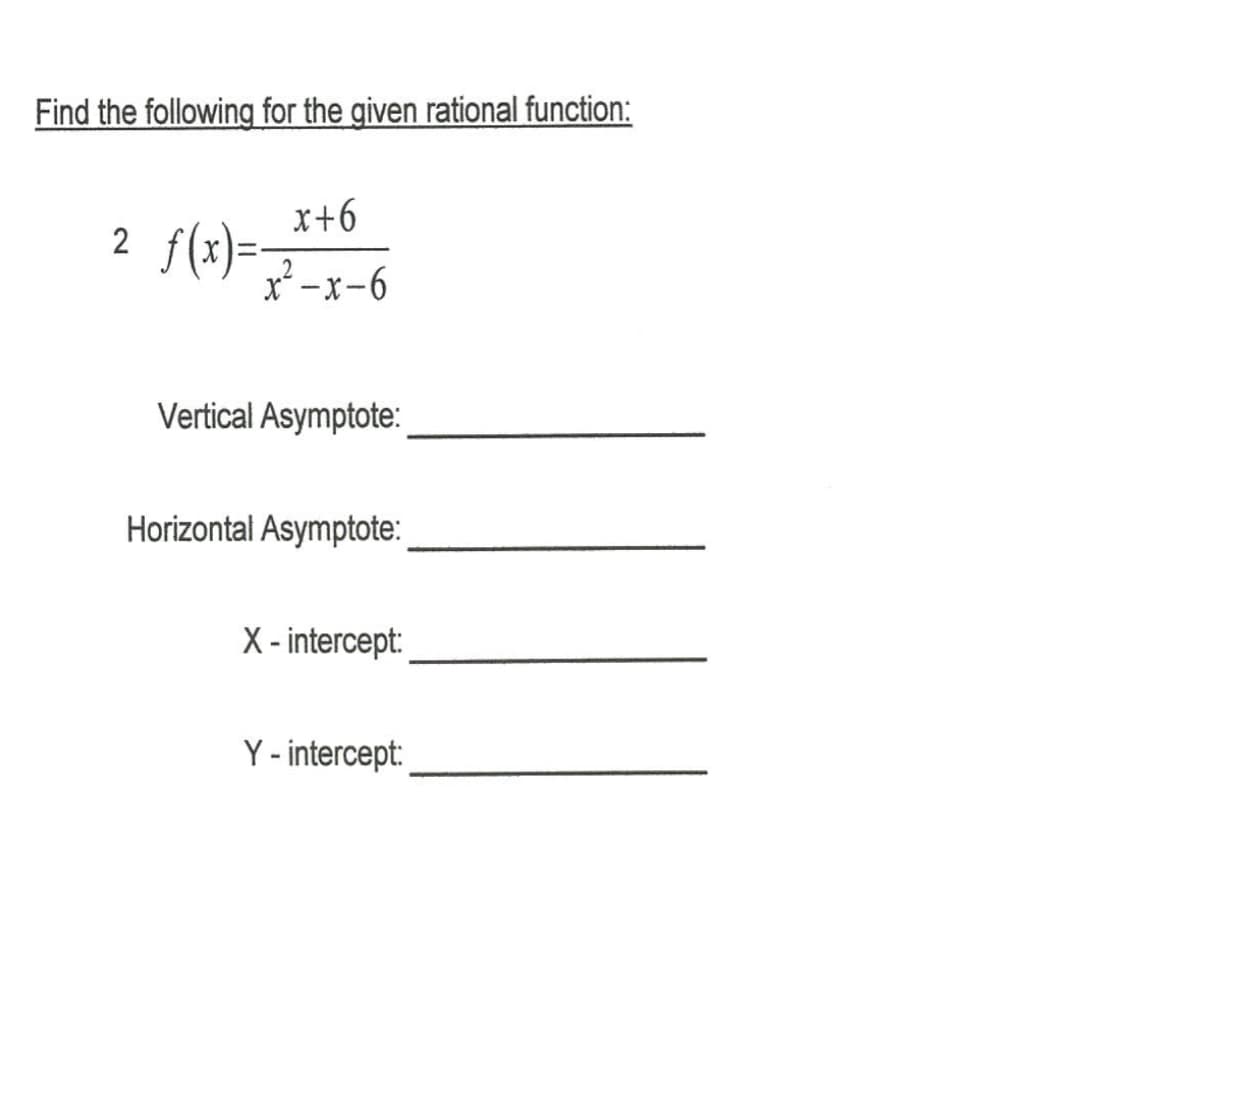 Find the following for the given rational function:
x+6
r'-x-6
2
f(x)=
Vertical Asymptote:
Horizontal Asymptote:
X-intercept
Y-intercept
